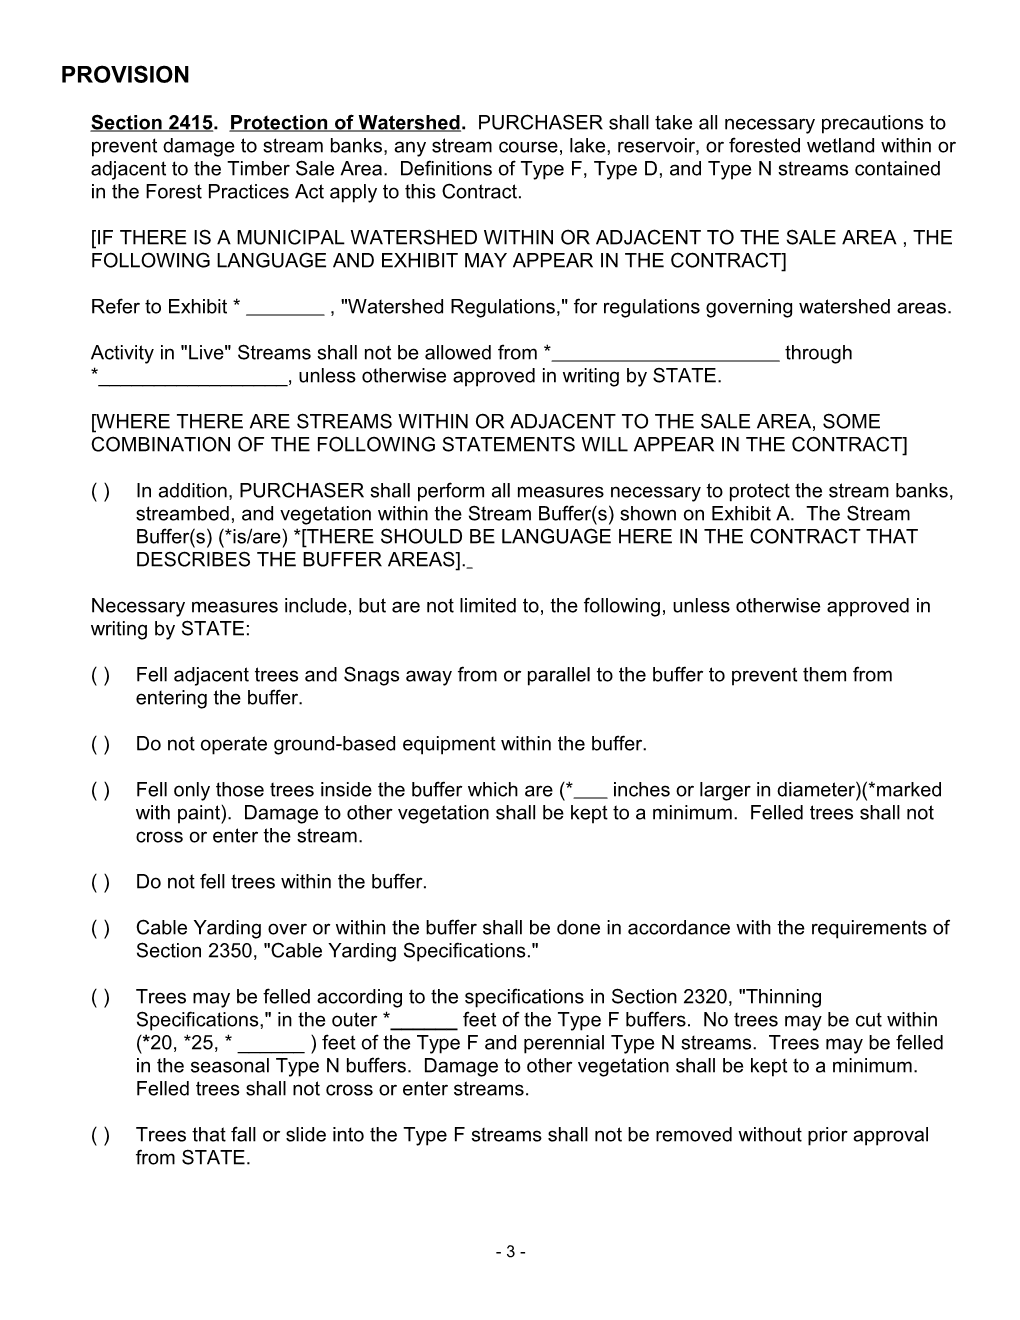 Timber Sale Contract, 2004 Working Copy (V 3)